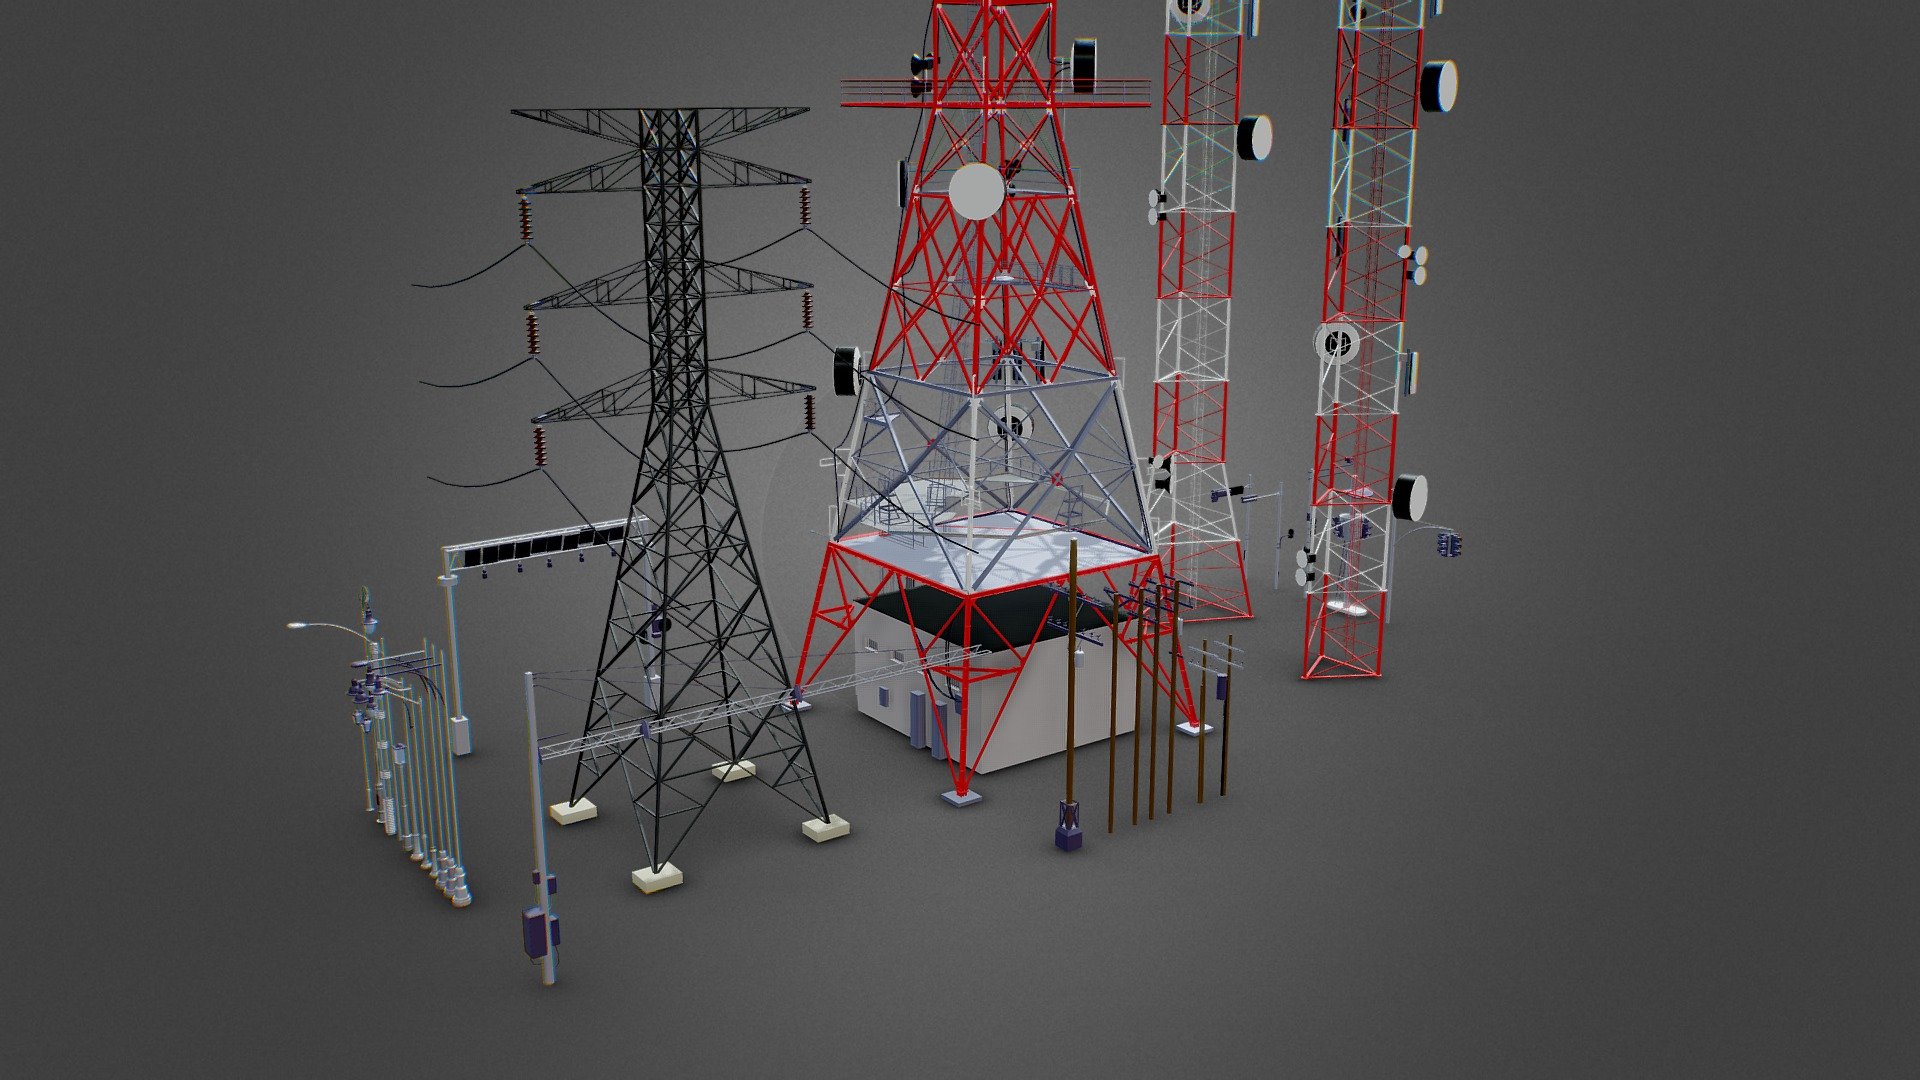 Scene with models:




transmission tower 

radio towers

traffic lights

street lights 

electric poles 

street structure

models made in blender 3.4

all colored with material data. no textures. 
base mesh models. low poly models 3d model